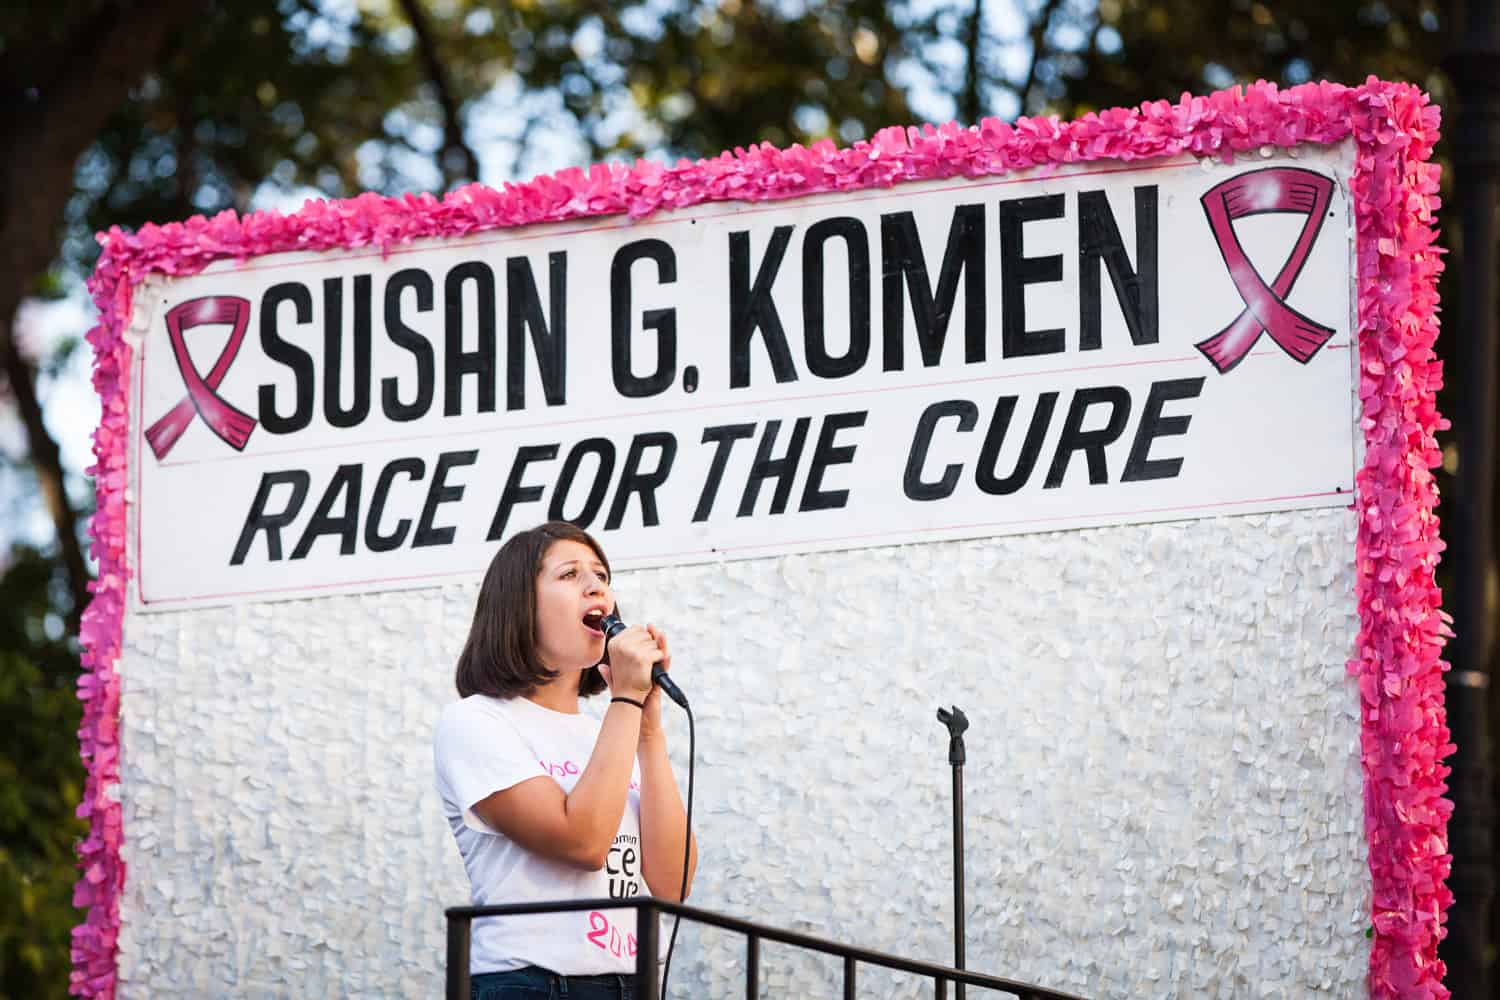 NYC Race for the Cure photos of woman singing on parade float